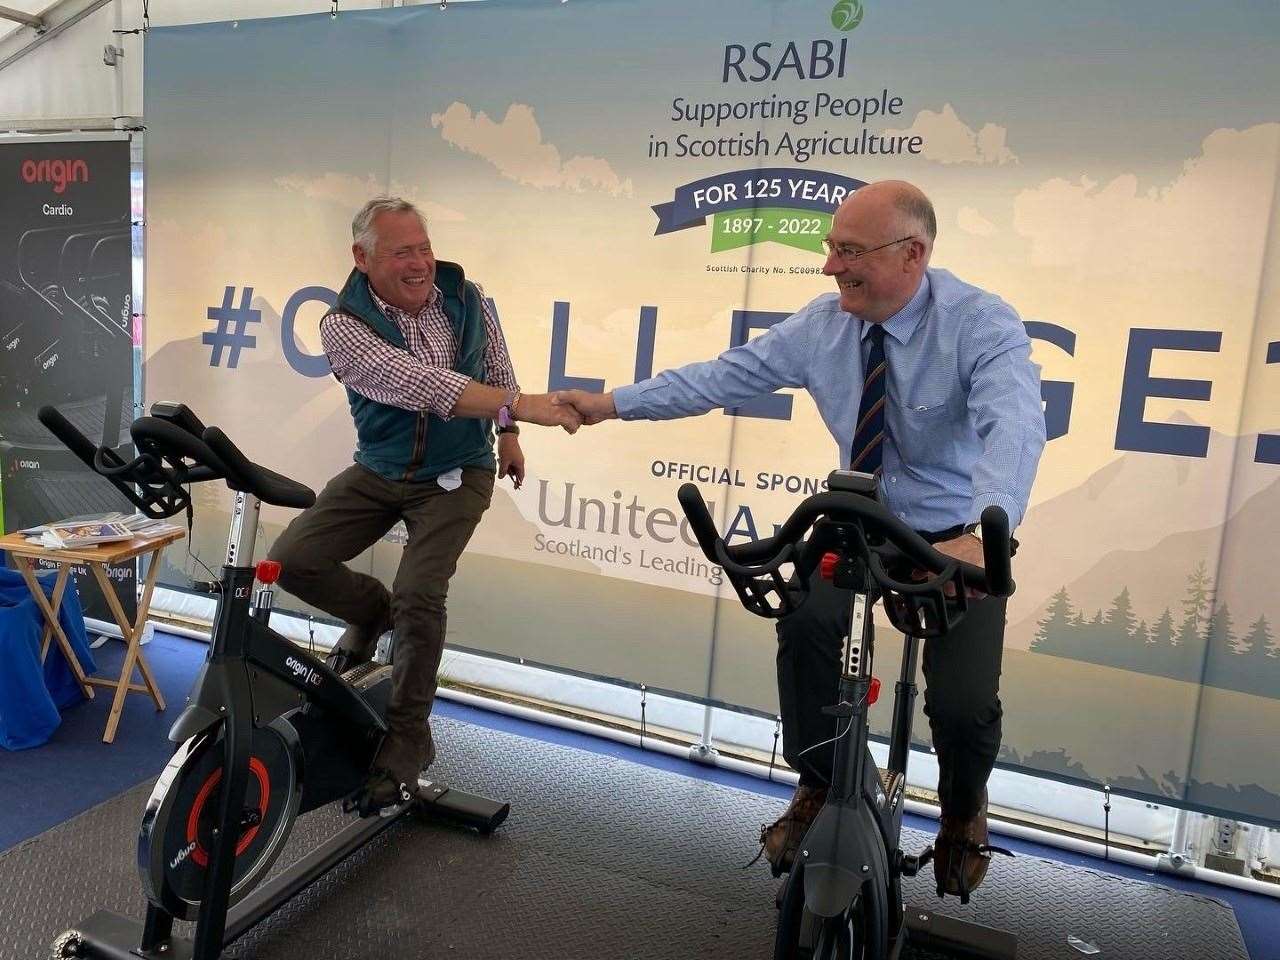 Aberdeenshire farmer Ken Howie (left) and Royal Highland Agricultural Society of Scotland chairman Bill Gray congratulate each other on their exertions for charity.